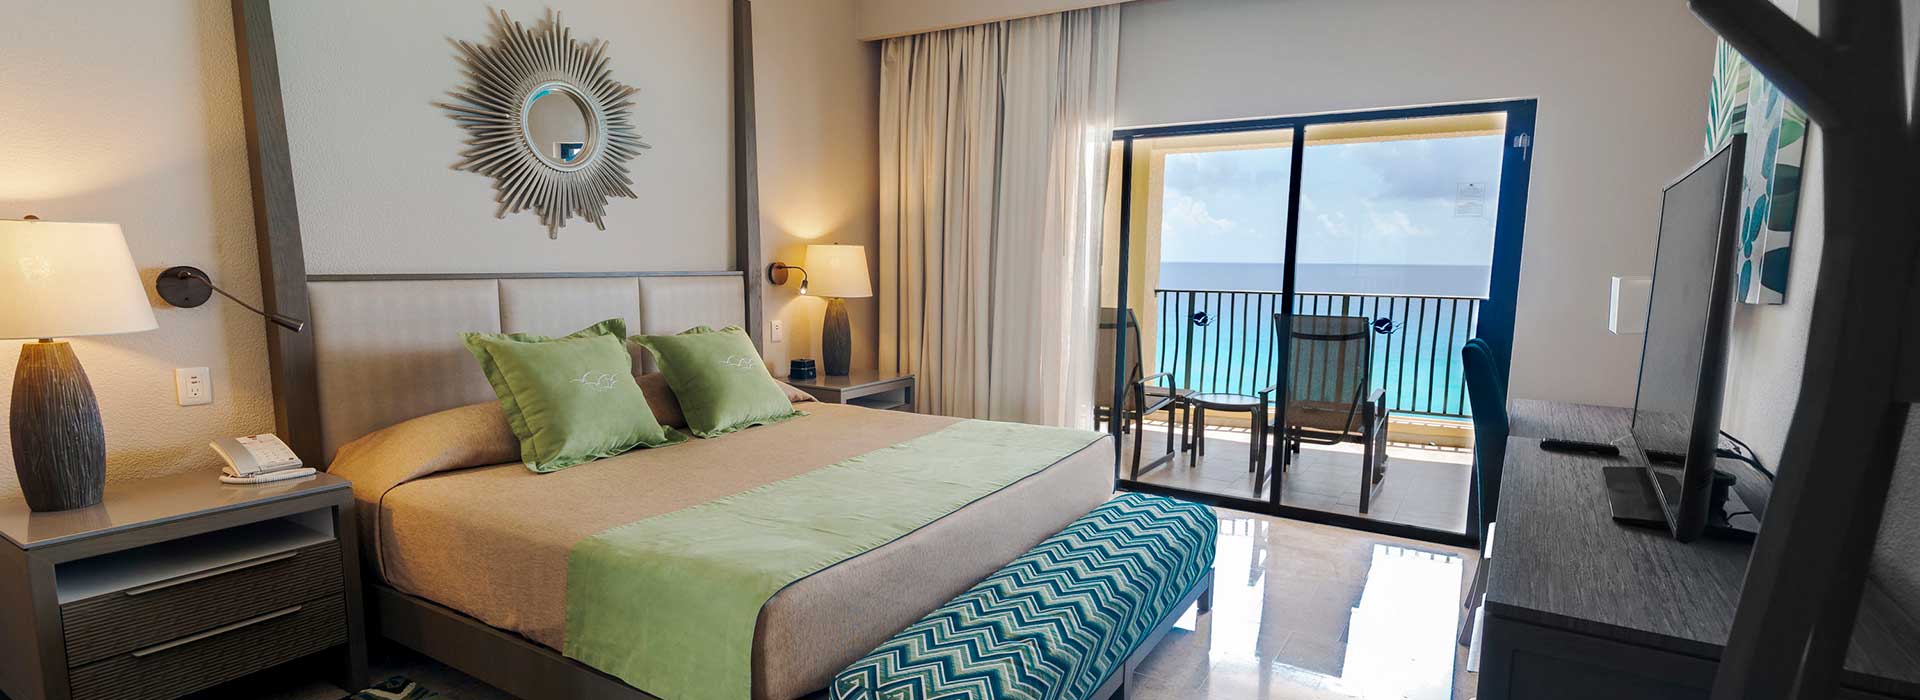 Ocean view villas with two bedroom suite with dining and living areas in The Royal Sands